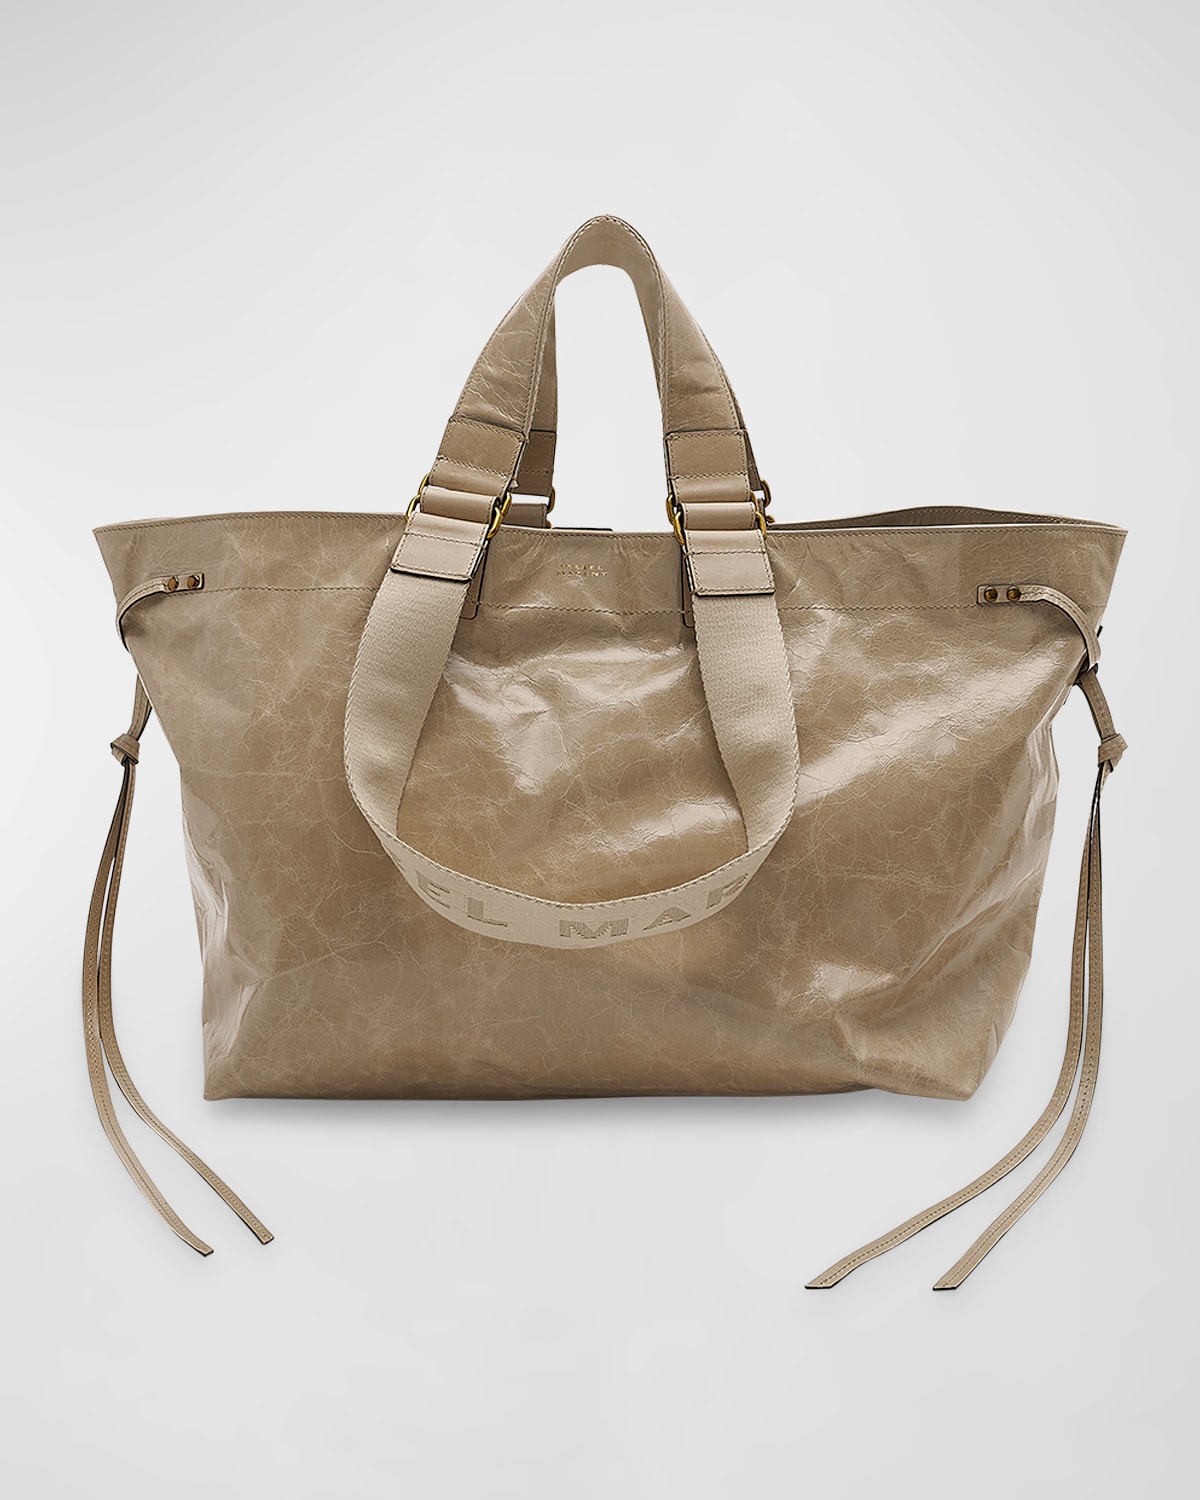 ISABEL MARANT WARDY DOUBLE-HANDLE LEATHER TOTE BAG